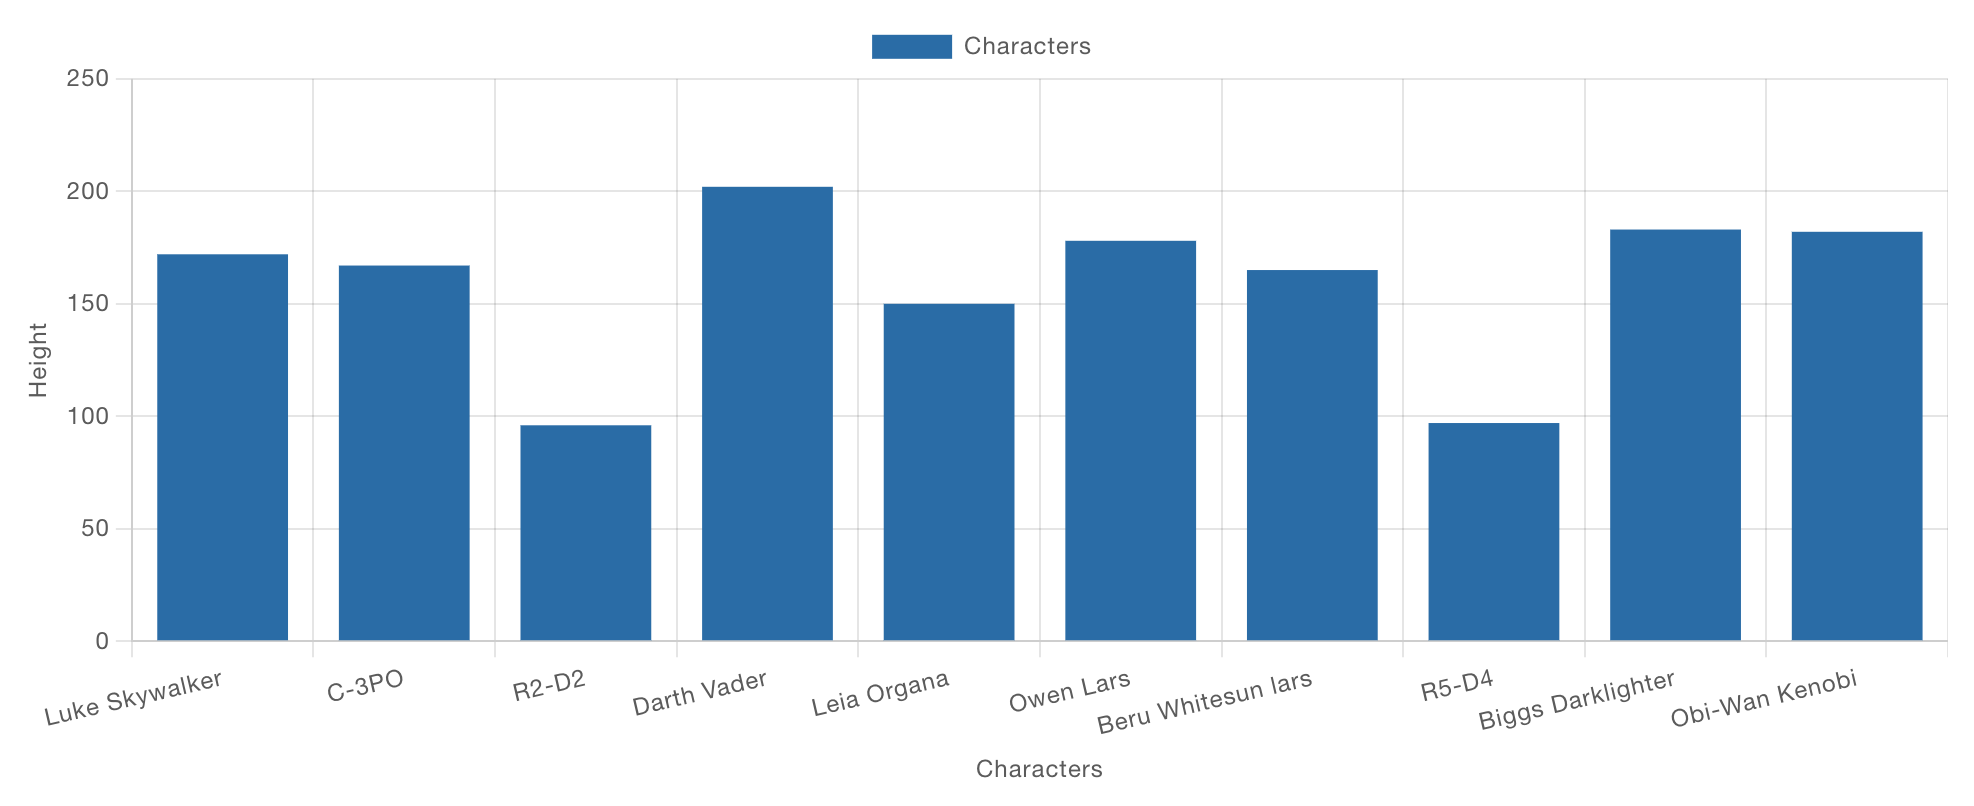 Example of a bar chart showing character 'height' data